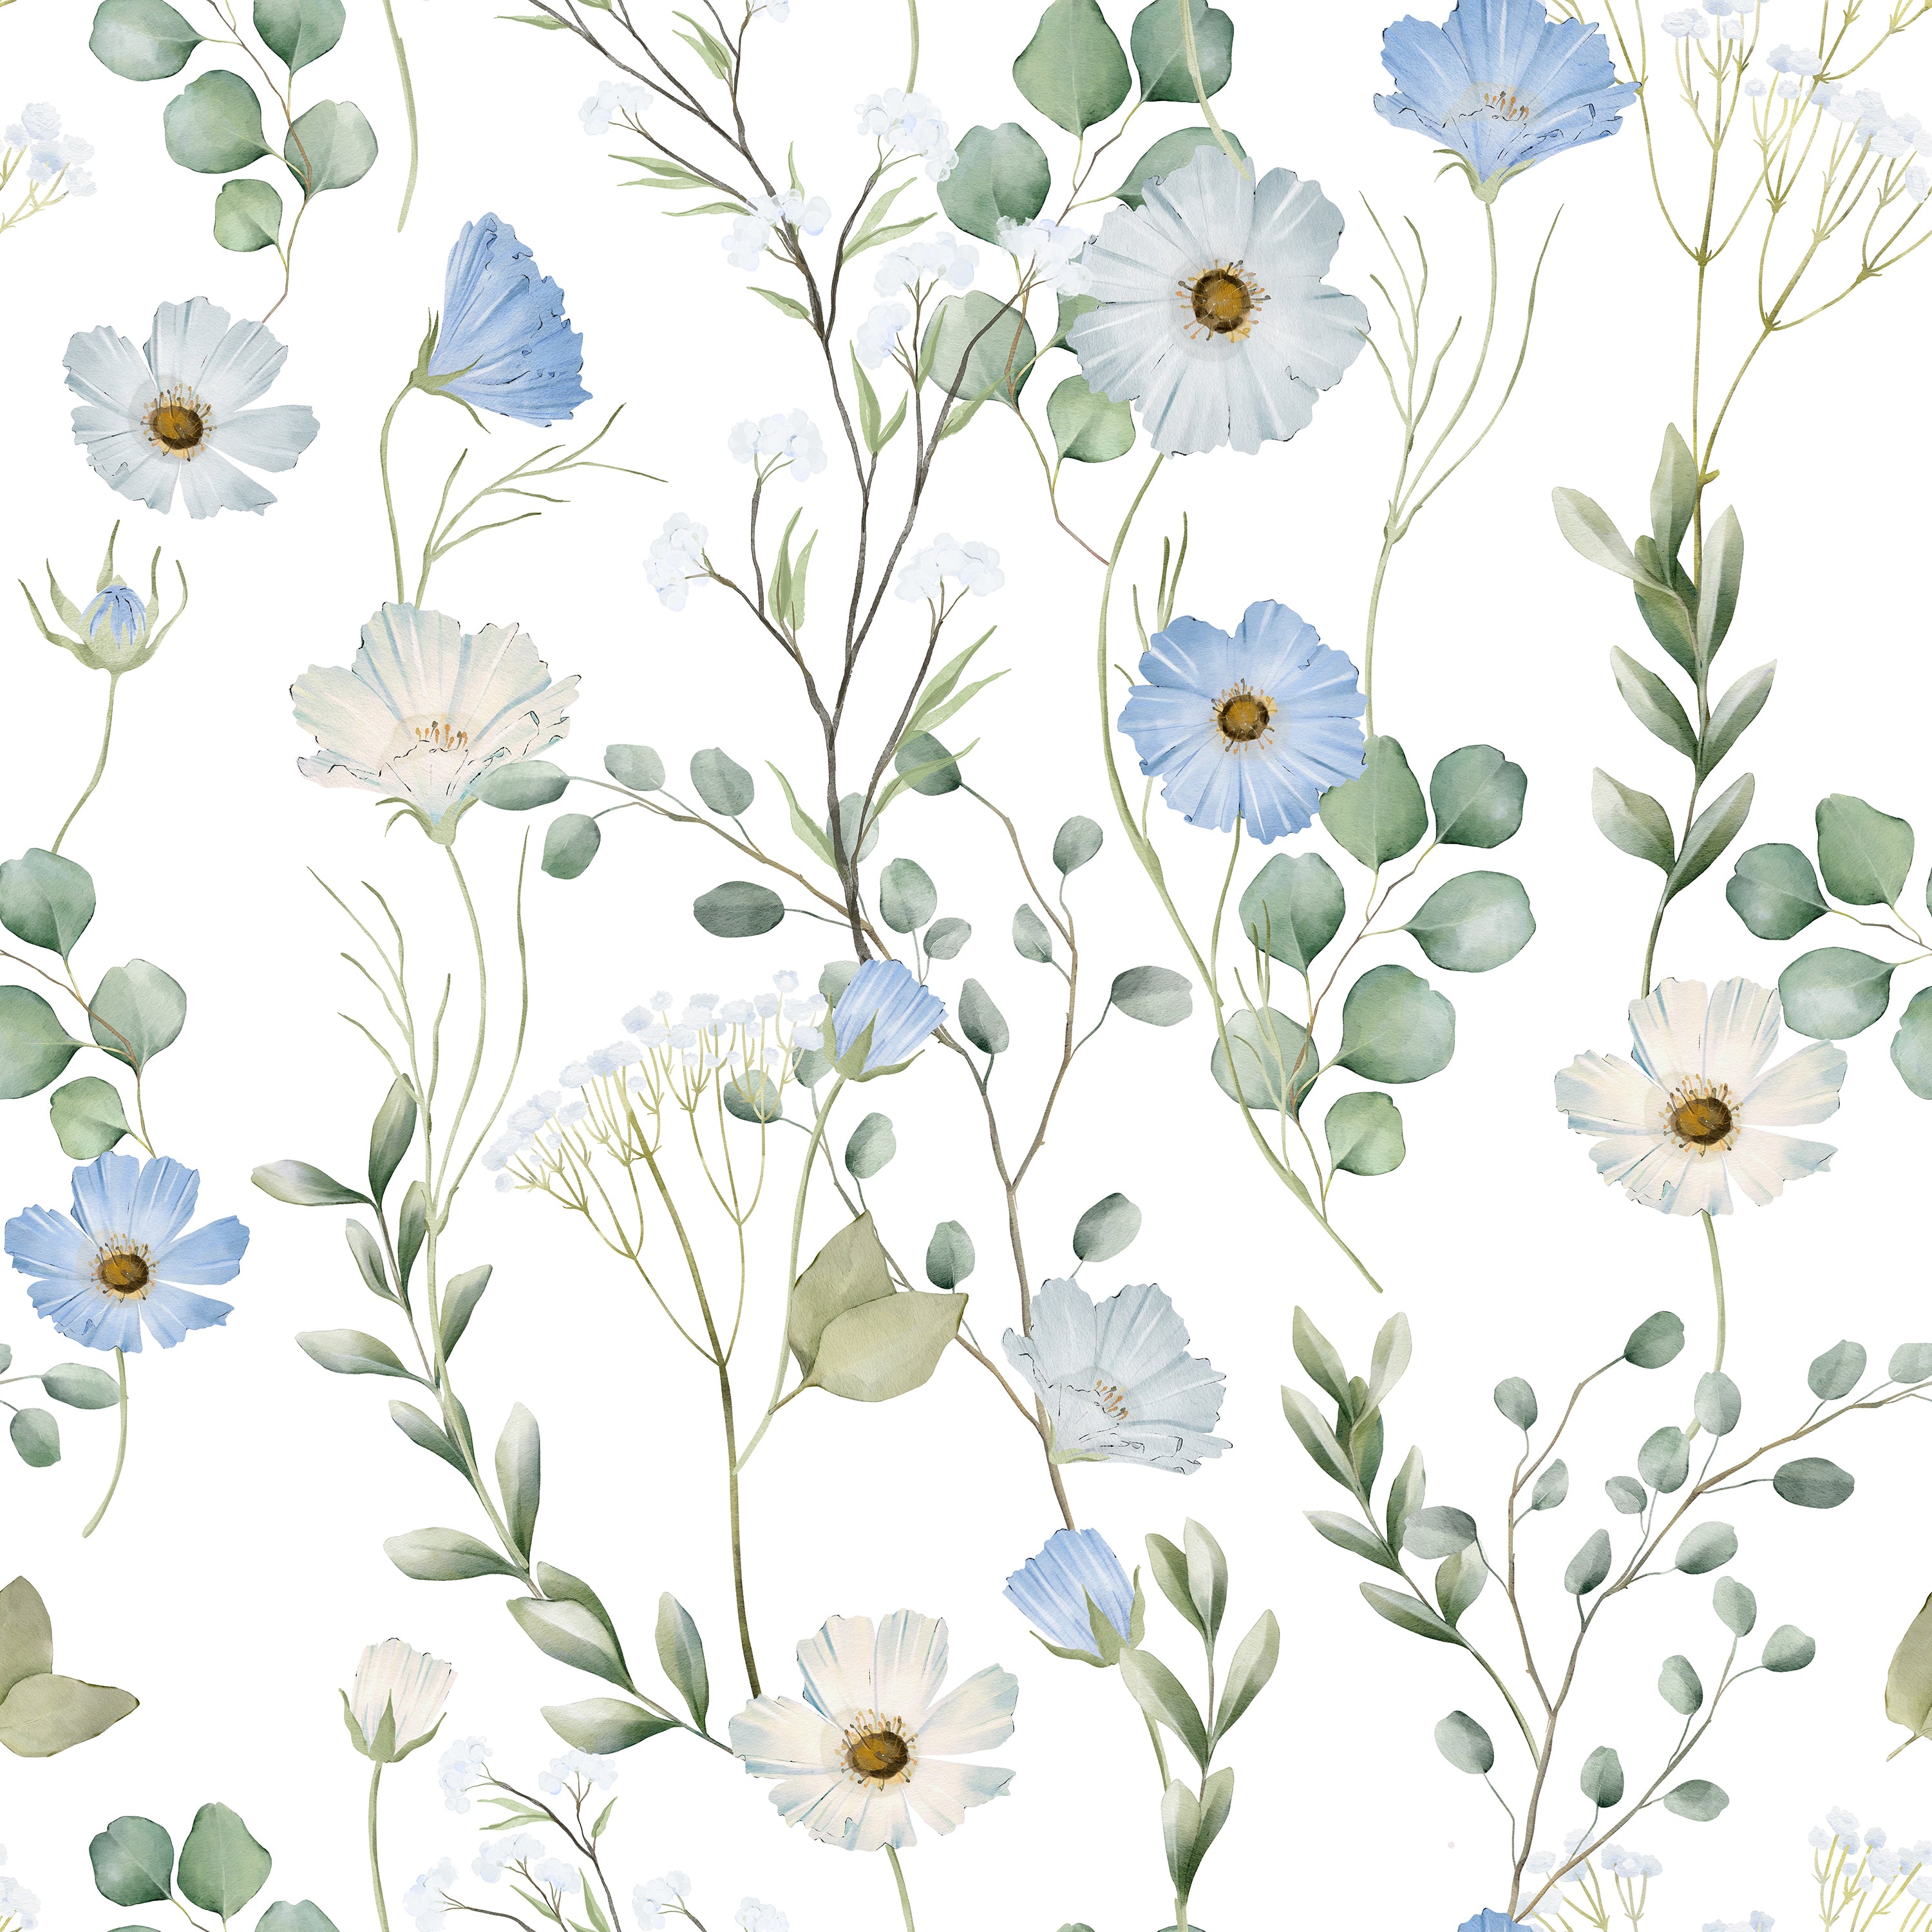 A close-up of the Florist Wallpaper, showcasing the intricate details of the botanical print with a variety of flowers in shades of blue and green. The wallpaper offers a fresh and airy feel, perfect for bringing the beauty of a meadow garden indoors.